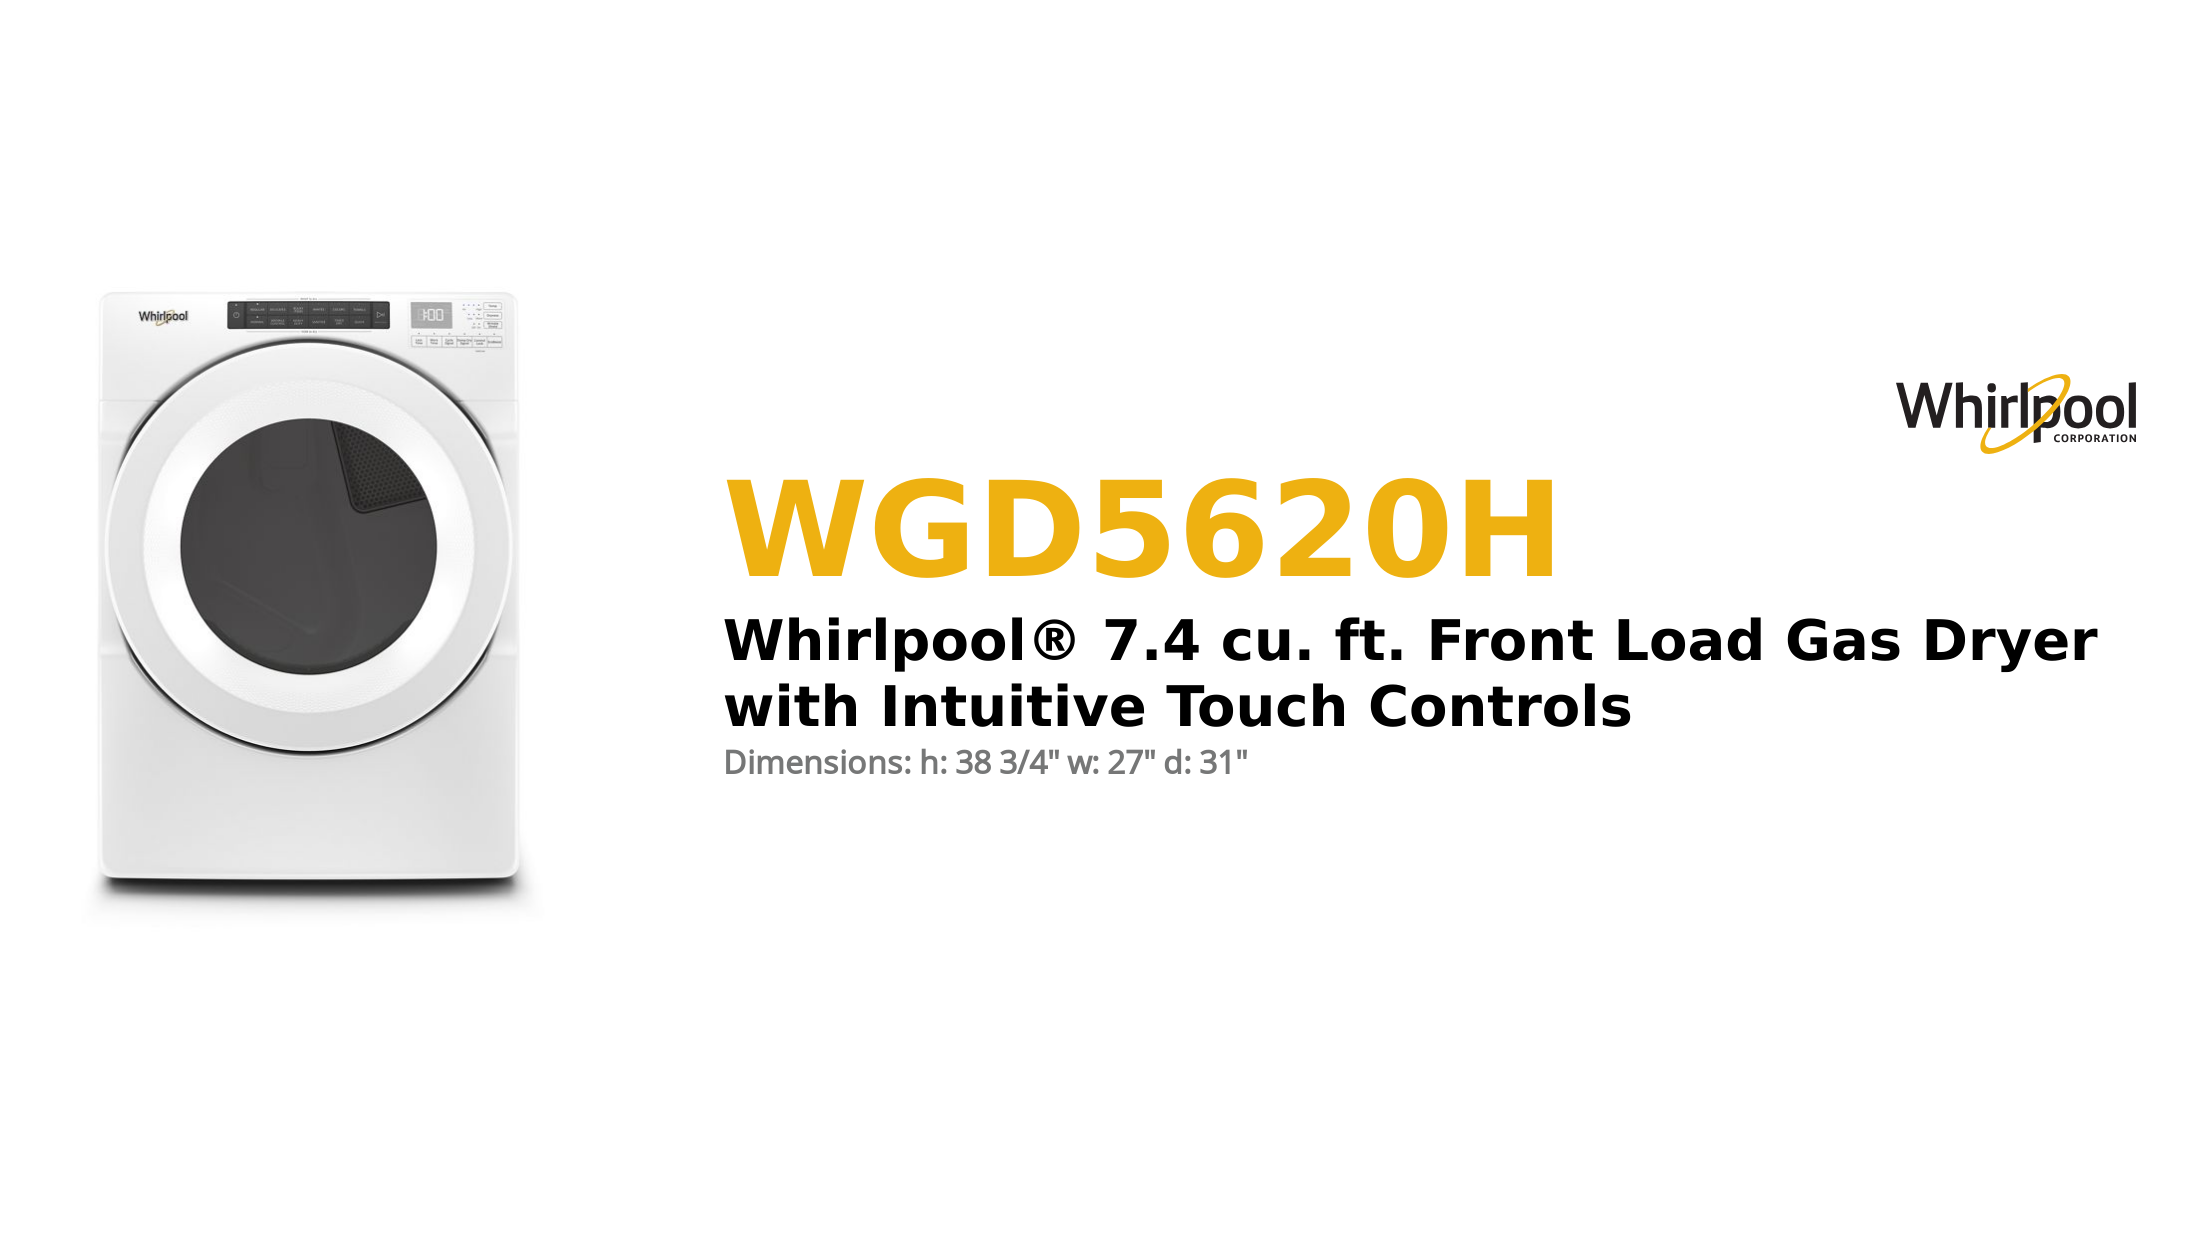 Whirlpool® 7.4 cu. ft. Front Load Gas Dryer with Intuitive Touch Controls